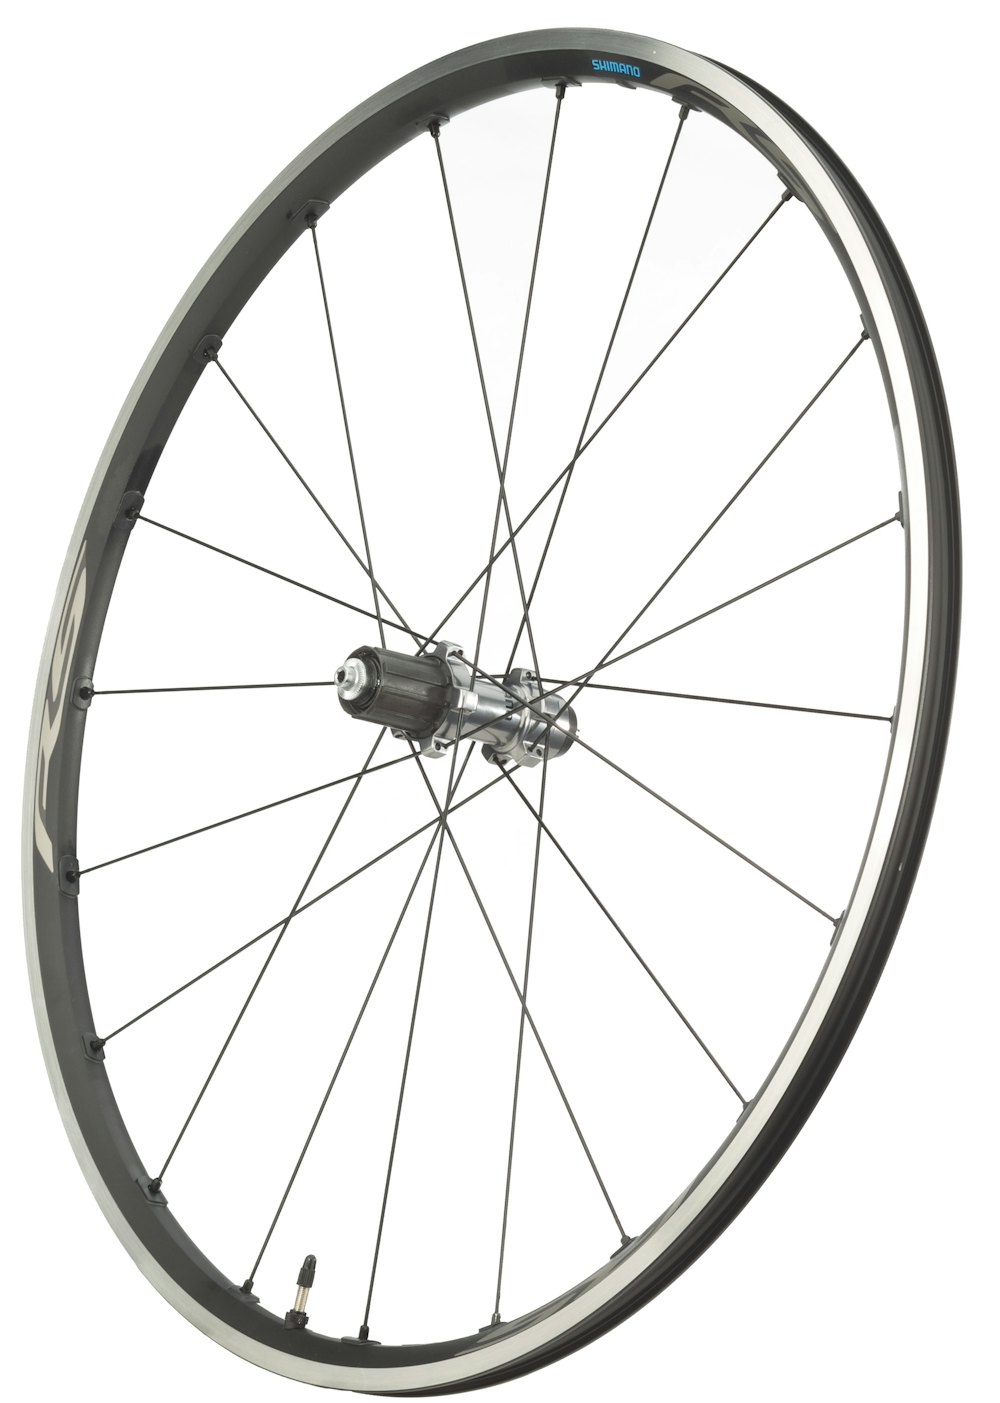 Shimano WH-RS500 Road Wheelset